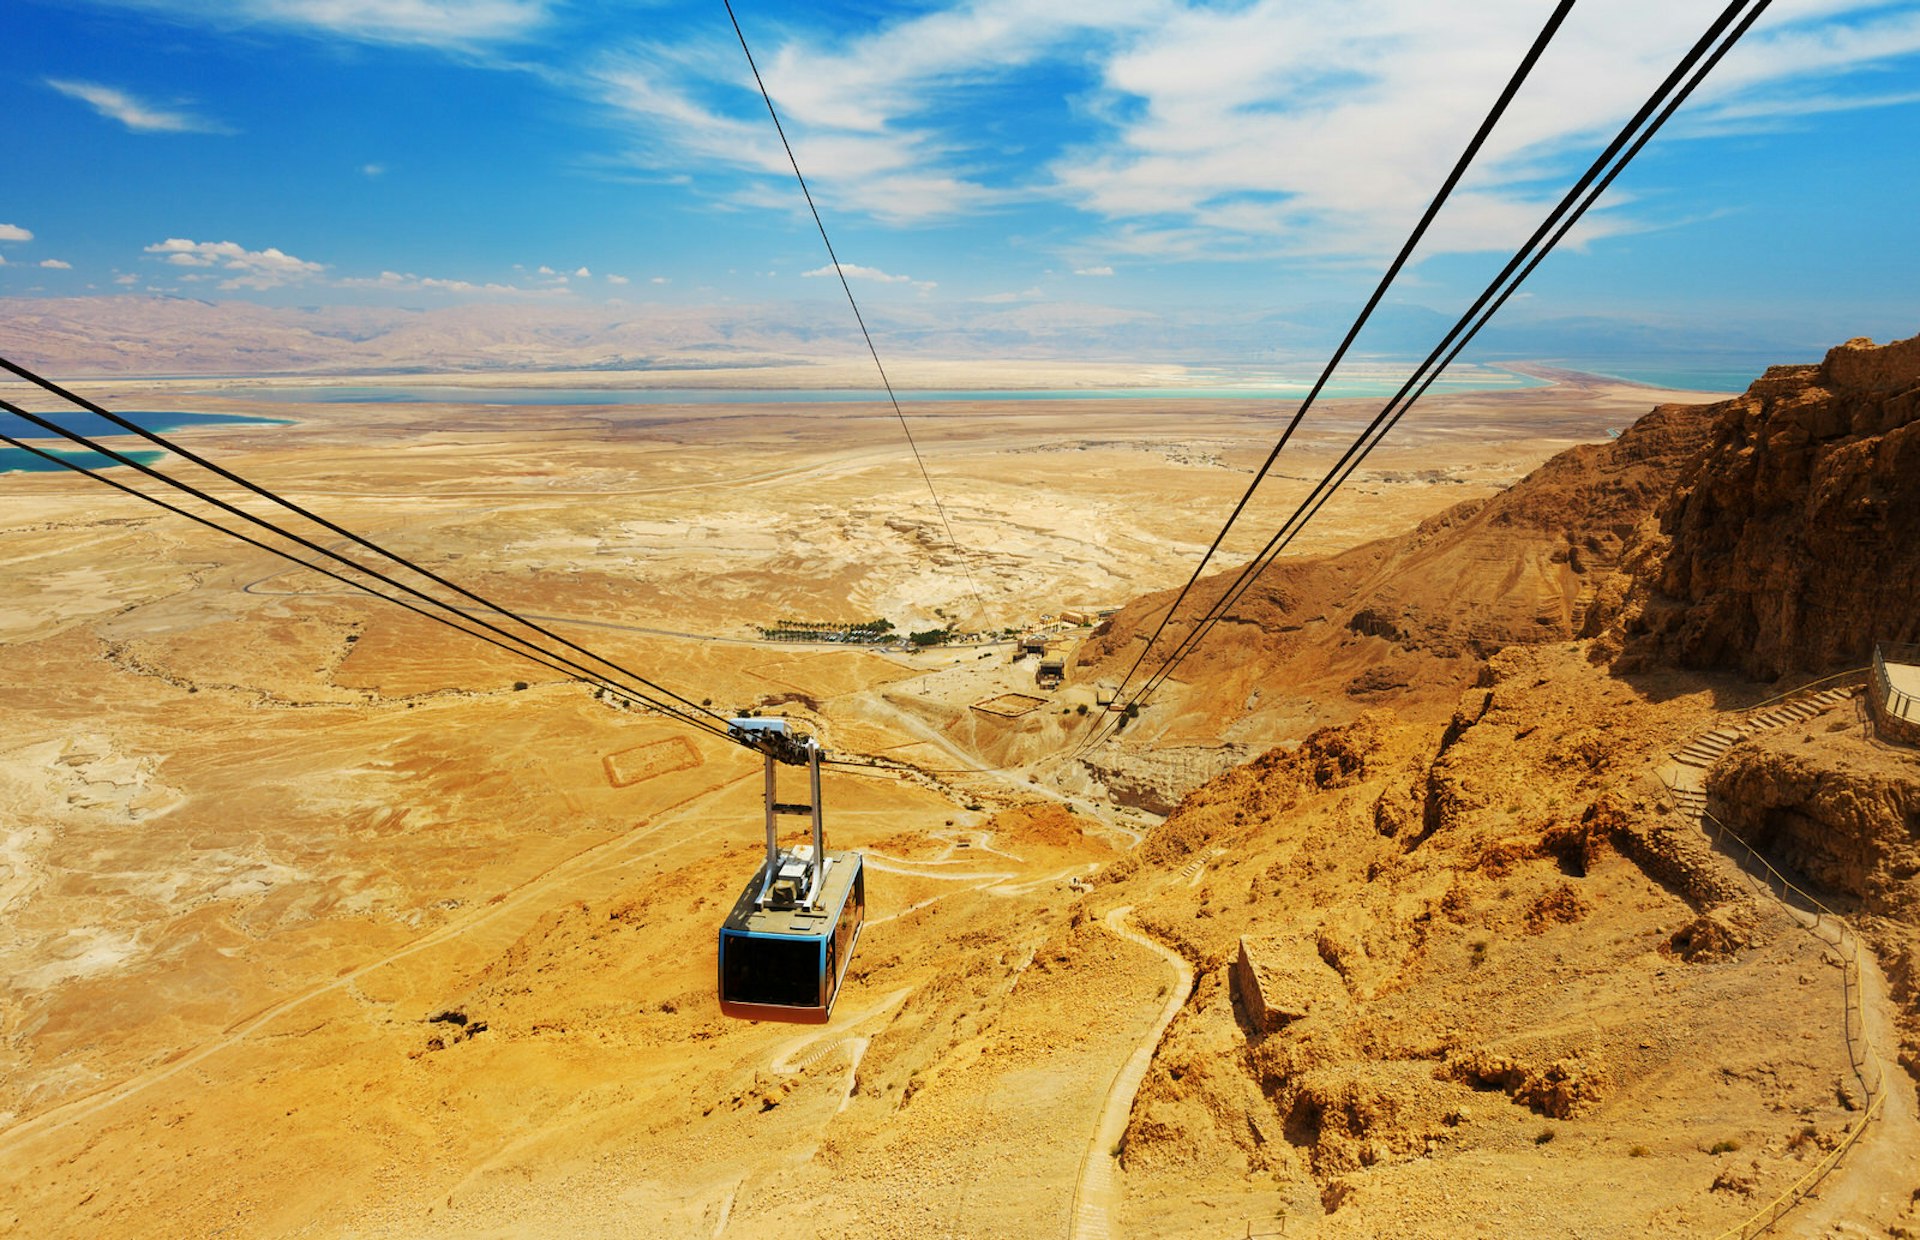 Masada cable car descends from the sky down to an orange landscape around the distant lake.